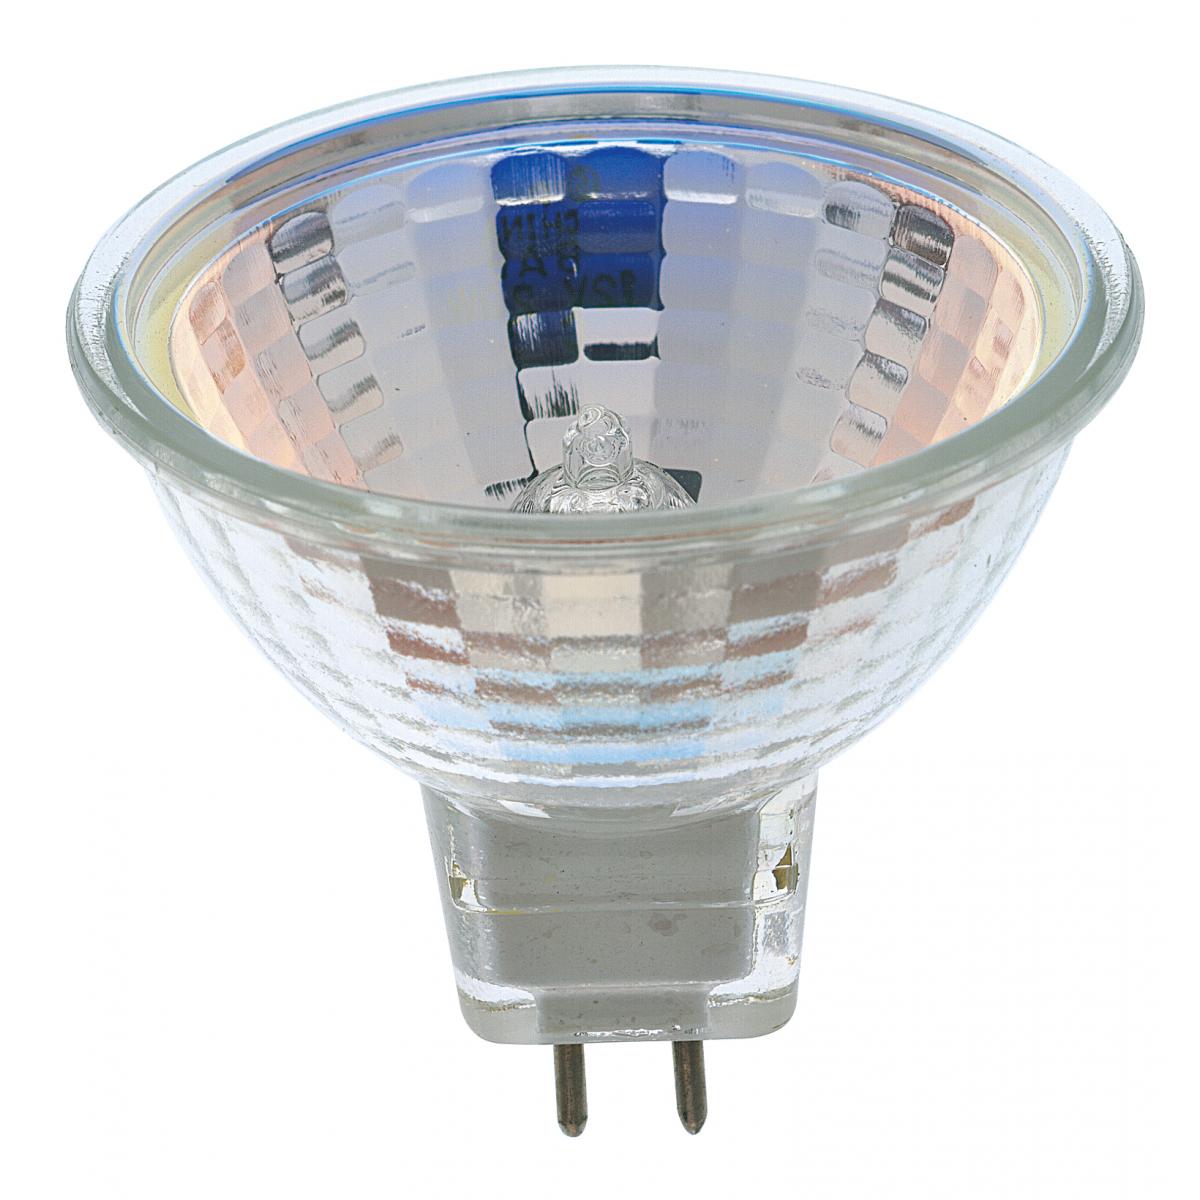 Replacement for Satco S1958 35MR16/NSP FRB 35W MR16 Narrow Spot Halogen - NOW LED S11392